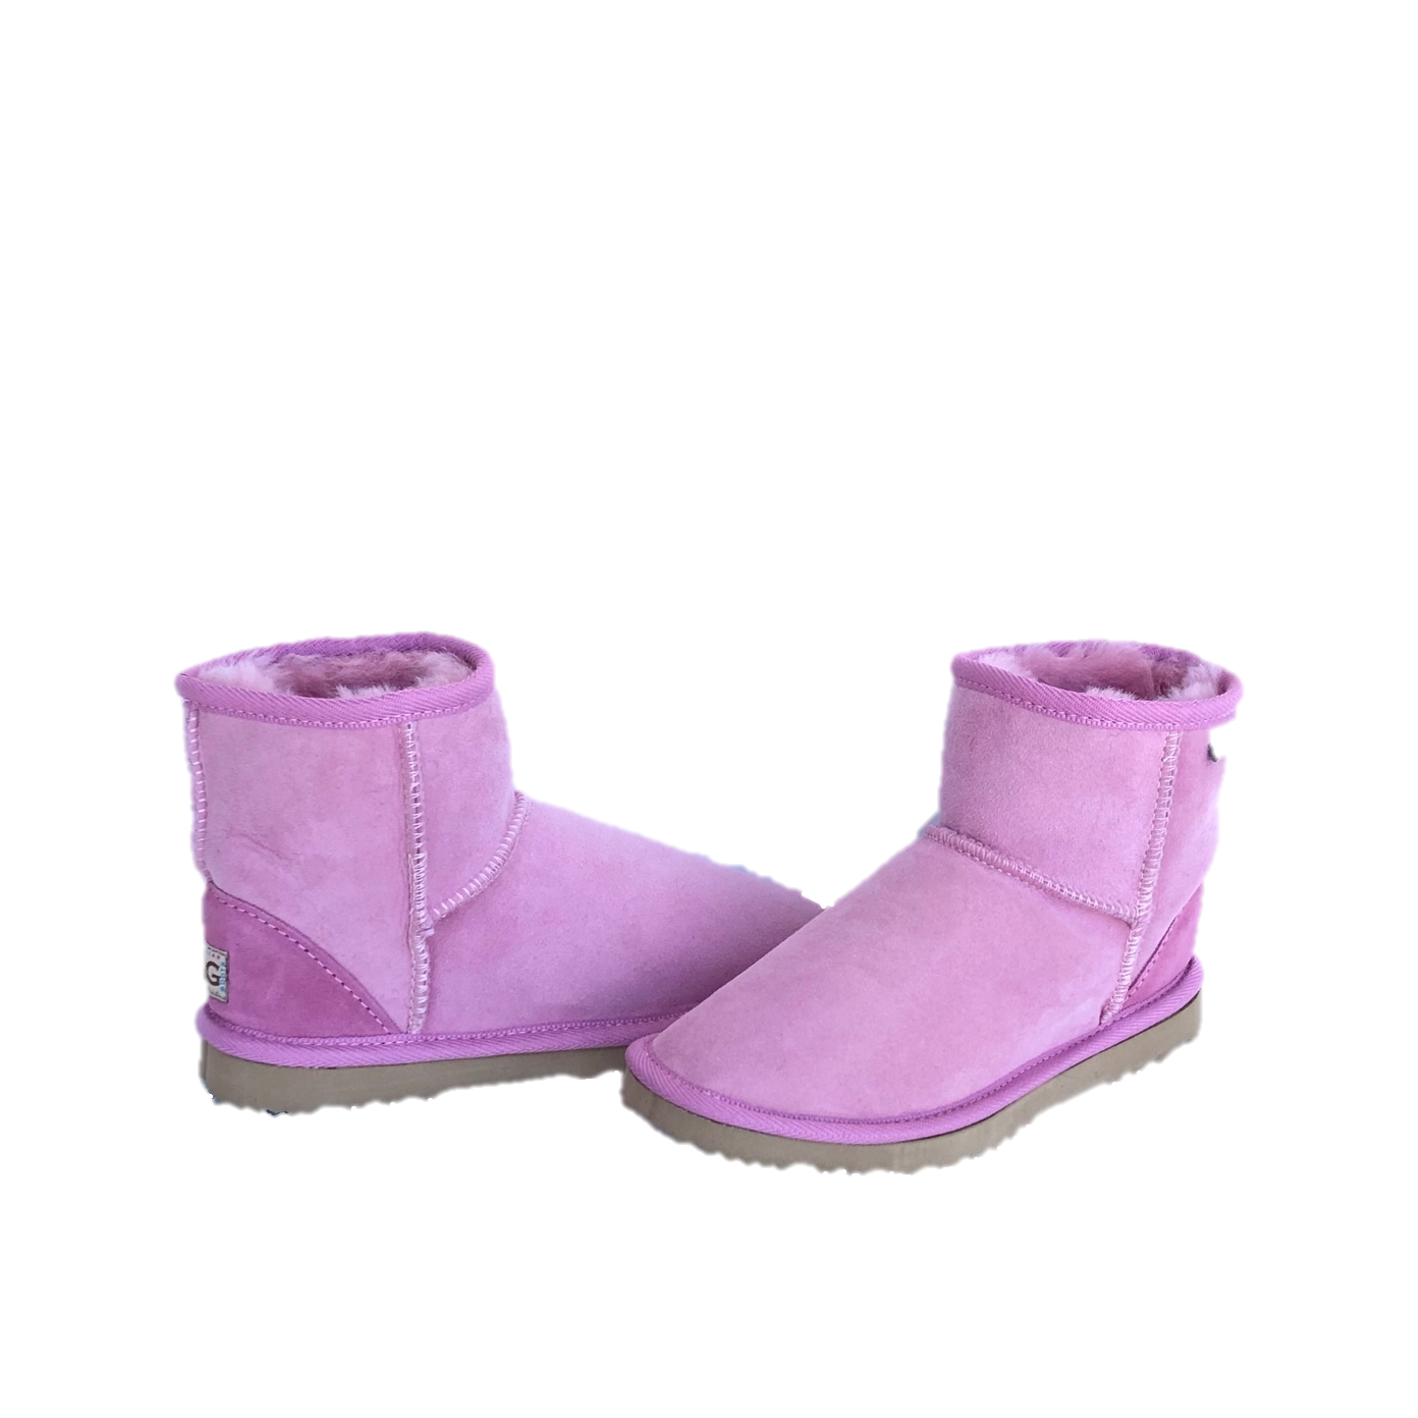 Kid's ultra short boots in pink